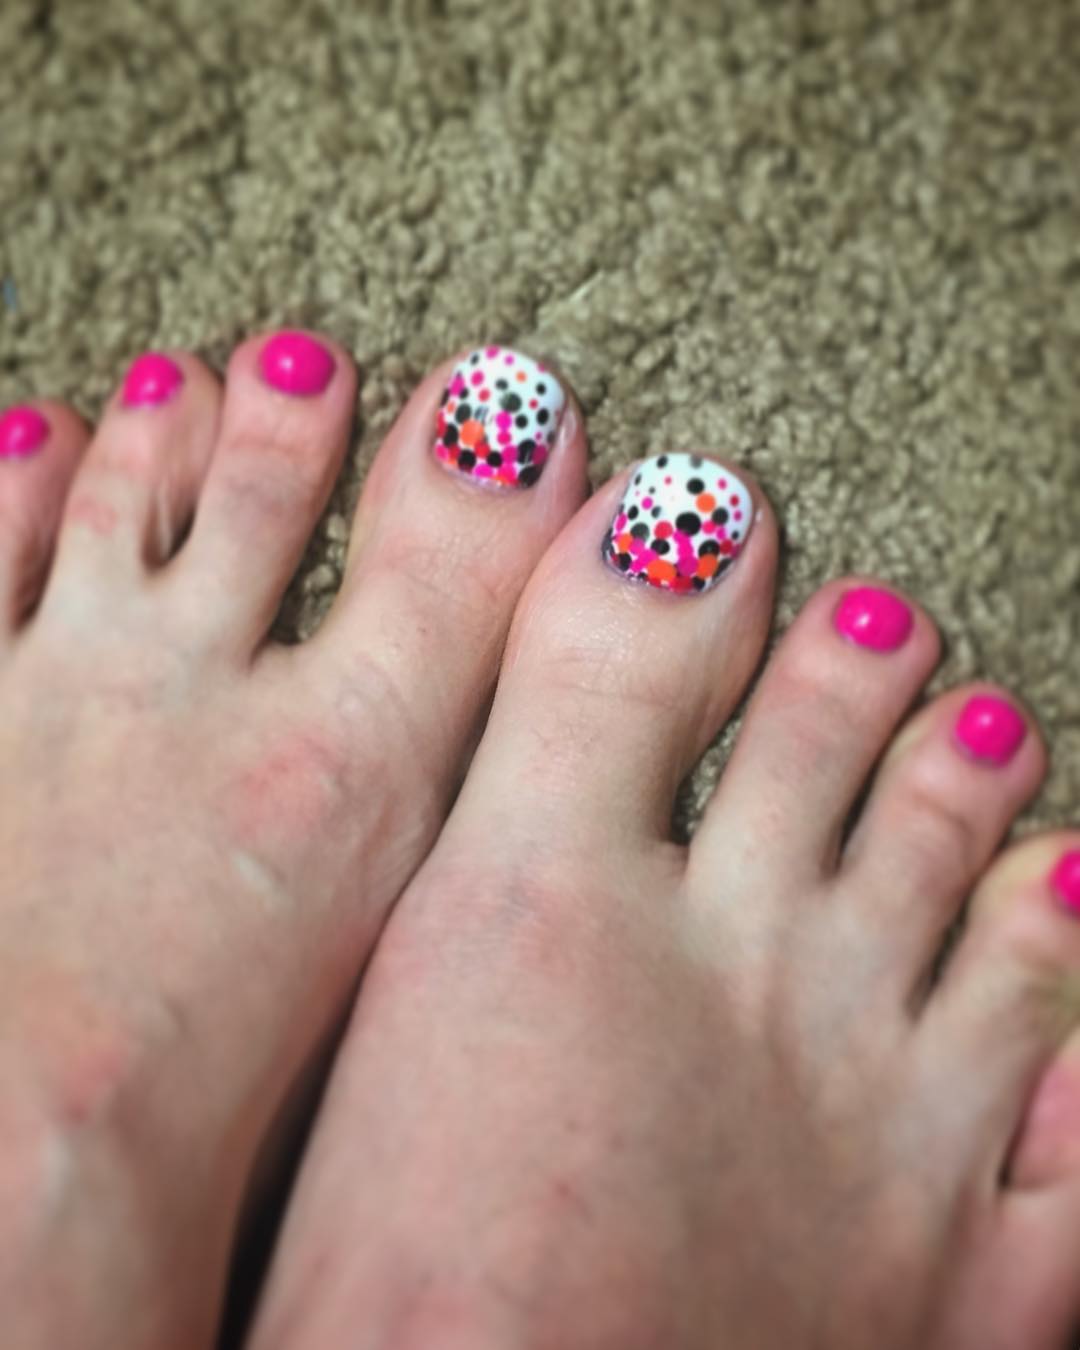 Awesome and Colorful Polka Dots Nail Art Design for Toe